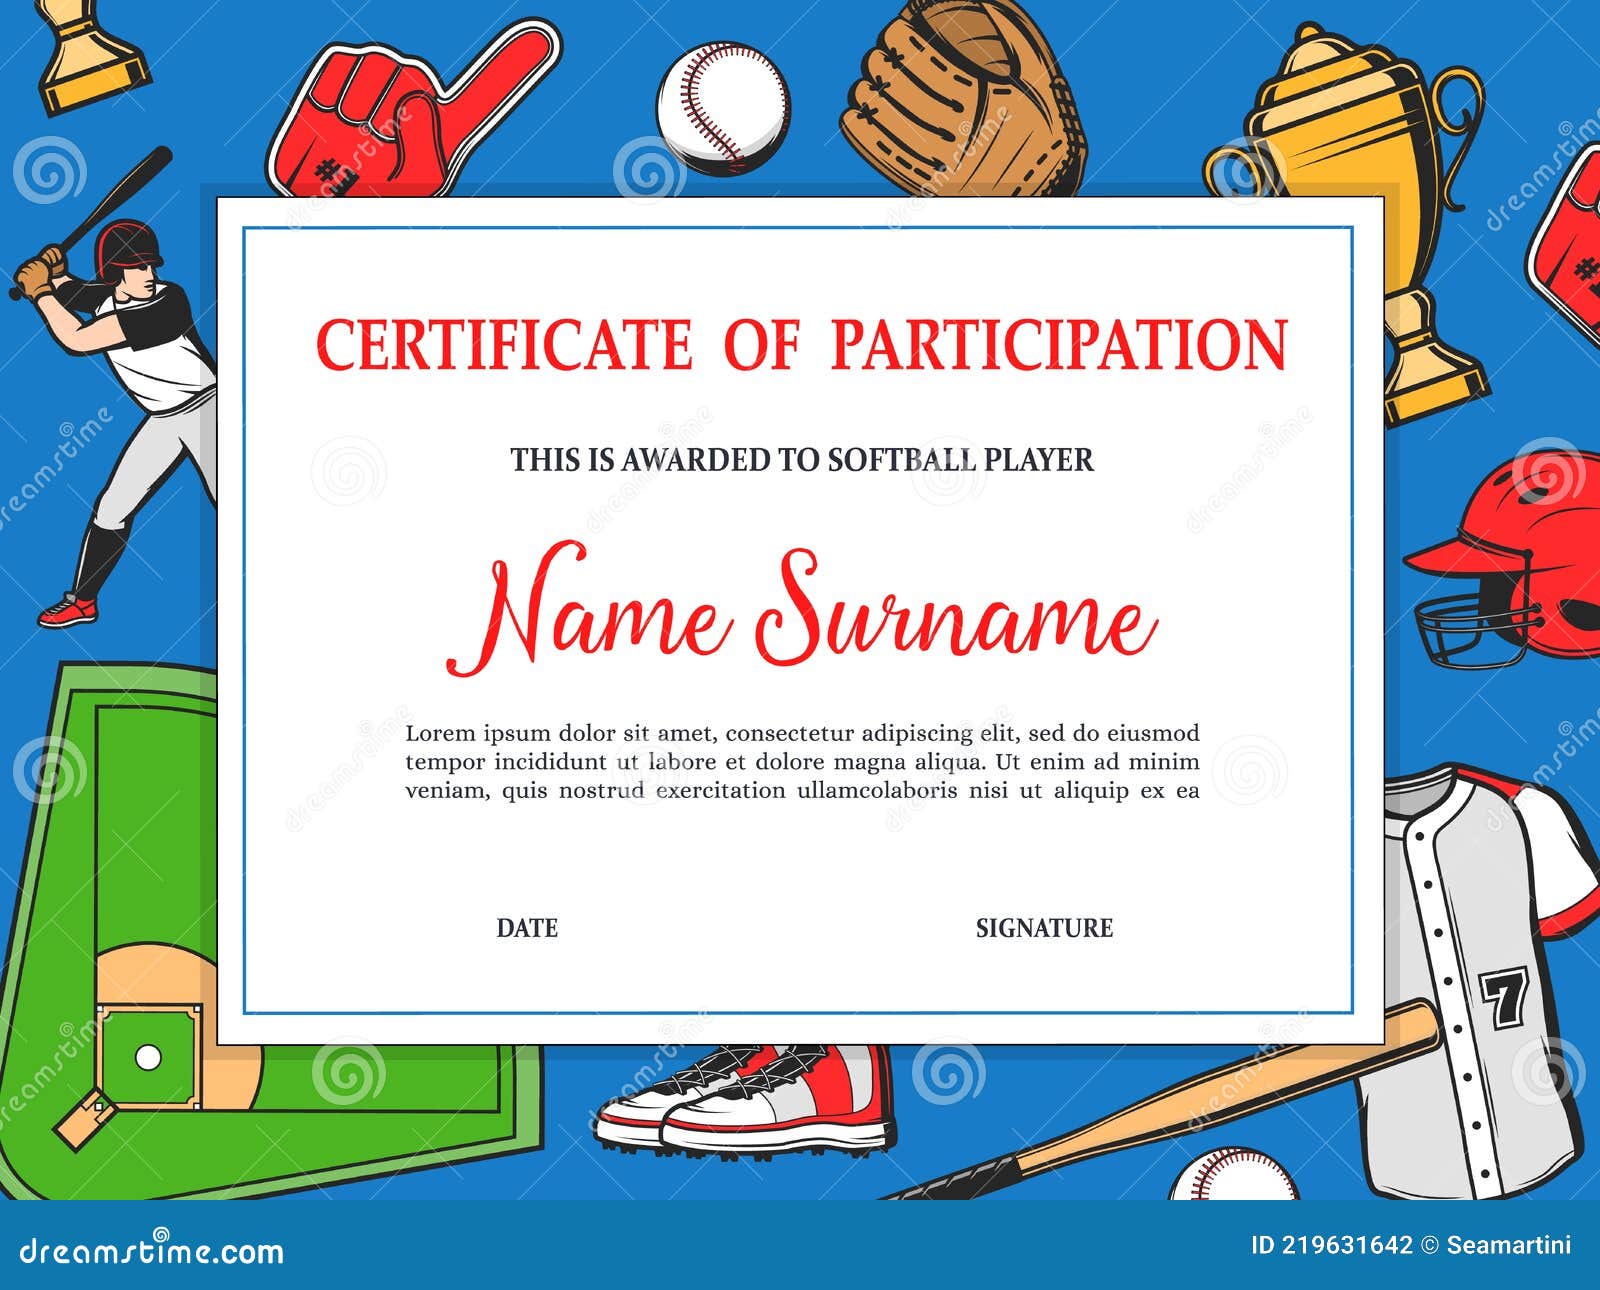 Softball Tournament Certificate of Participation Stock Vector With Softball Certificate Templates Free